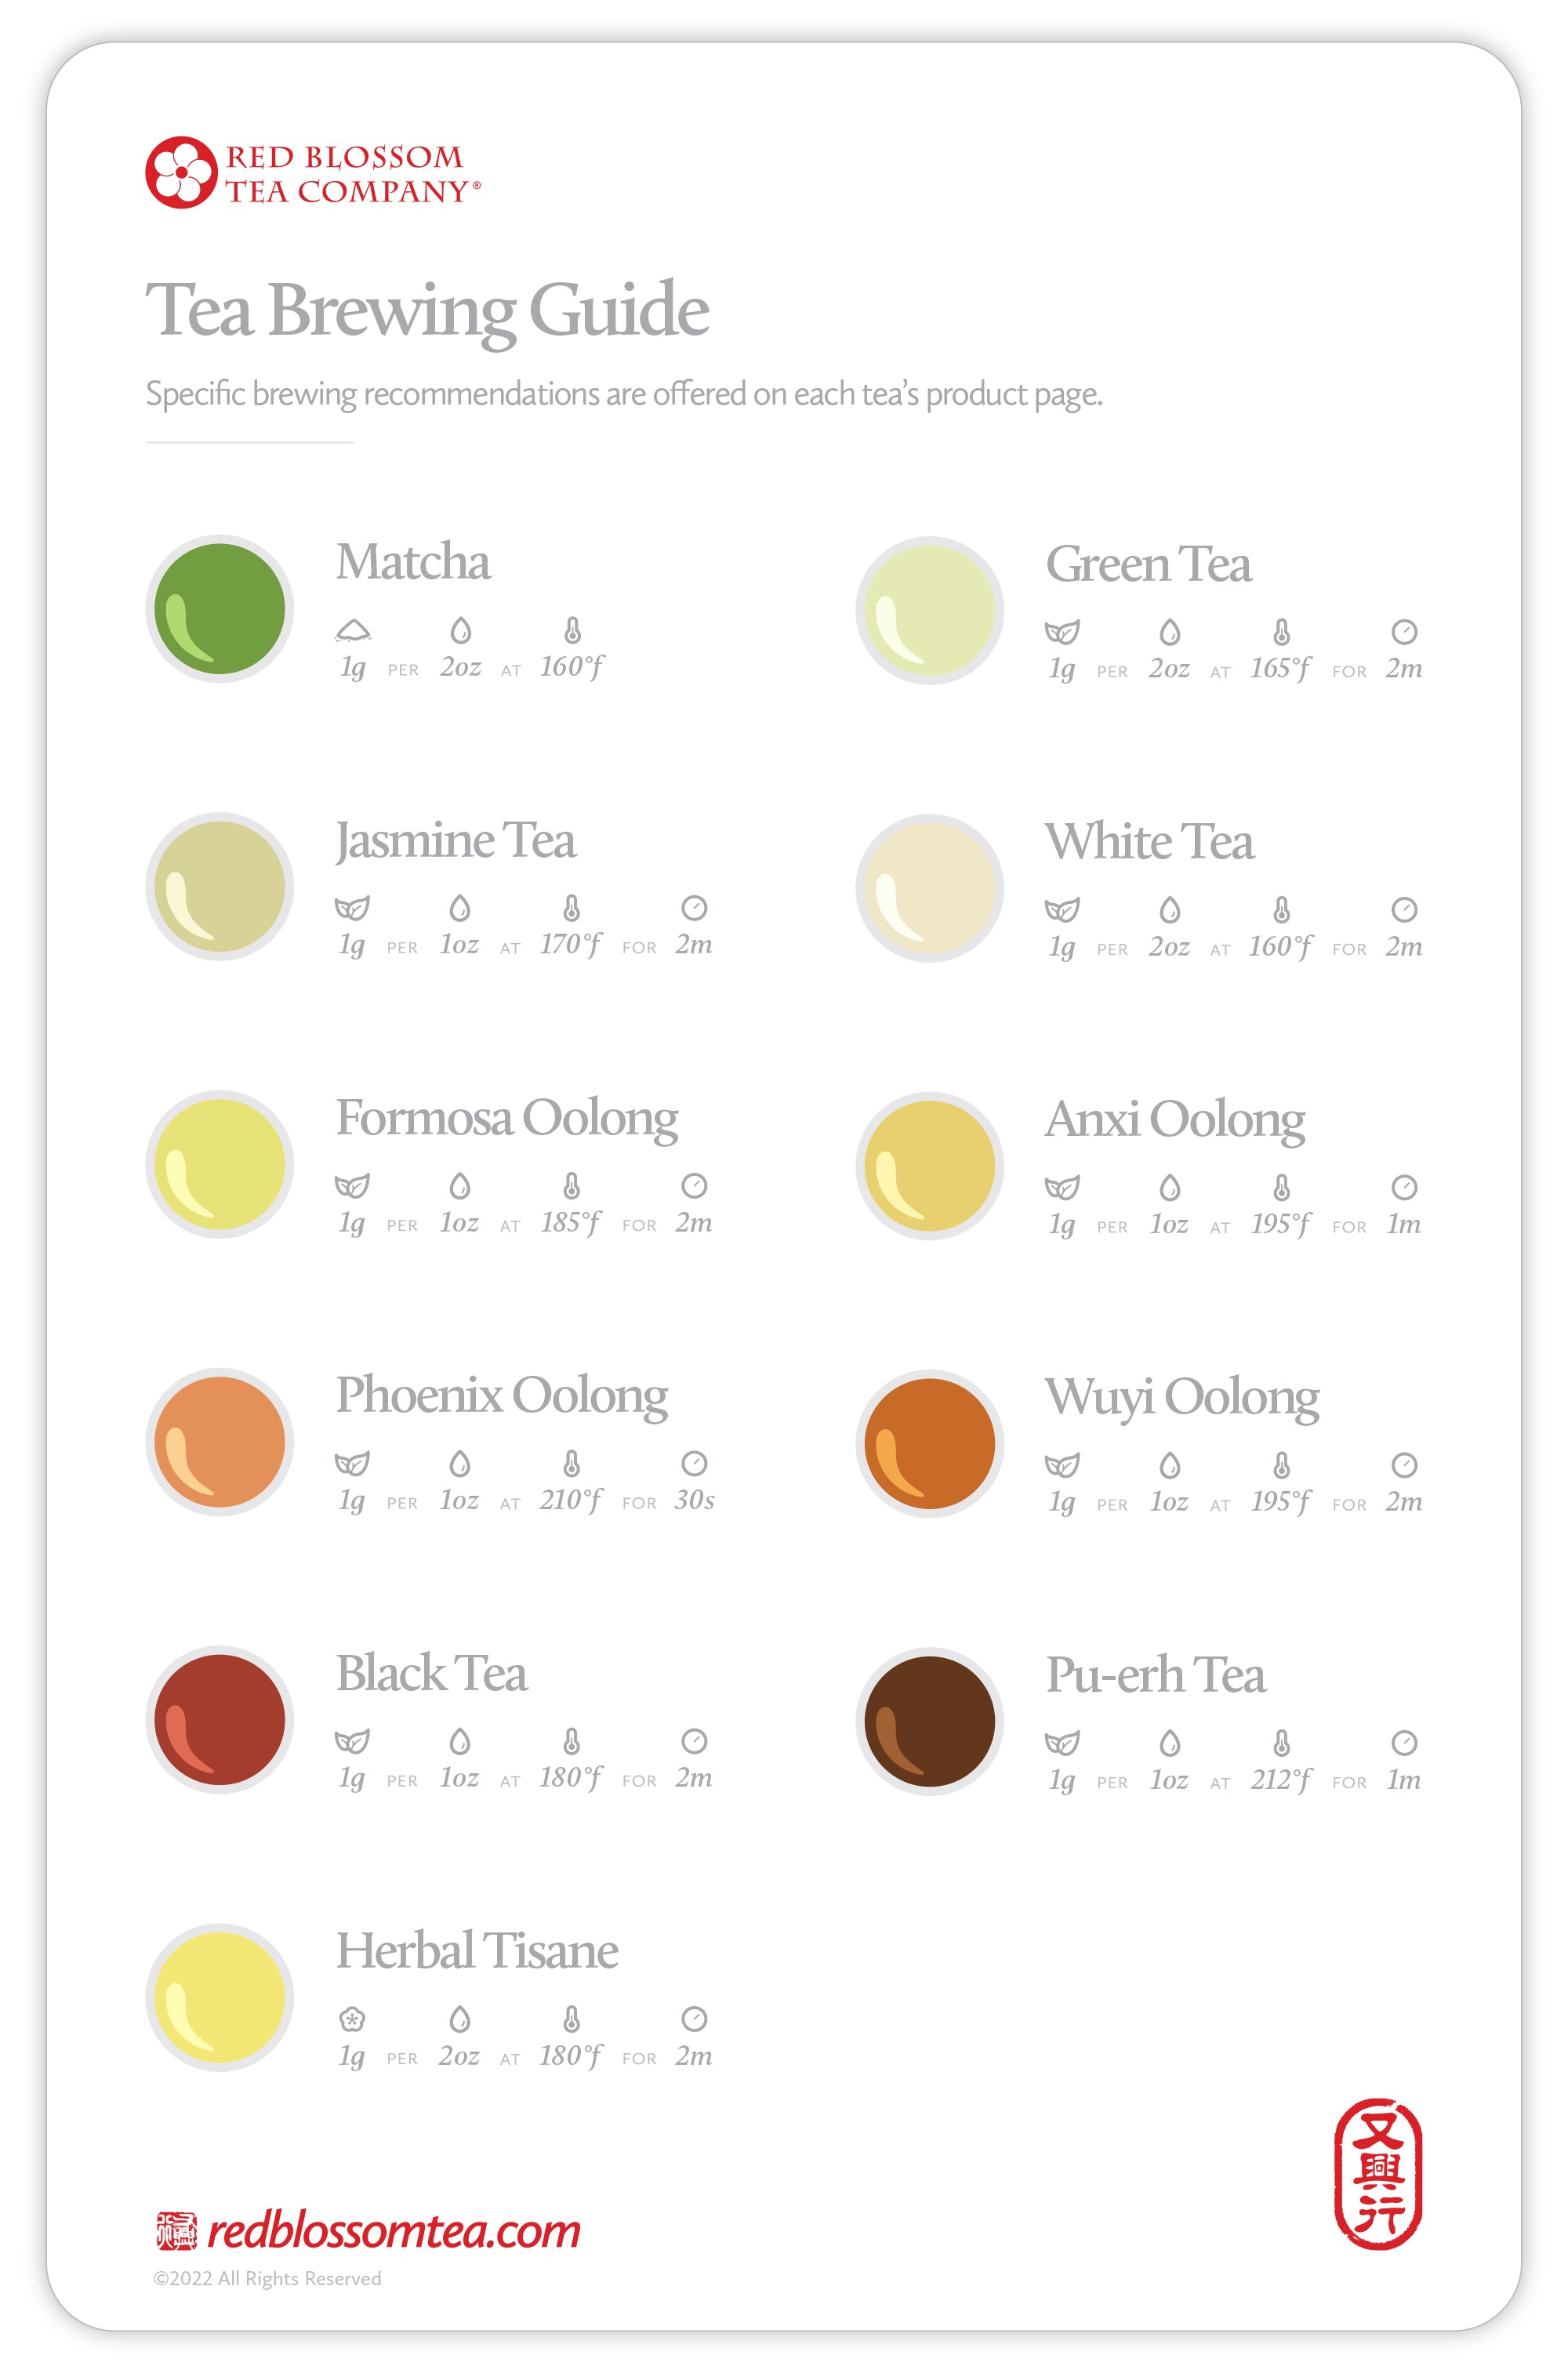 Loose leaf tea brewing FAQ - how to brew your tea to taste its